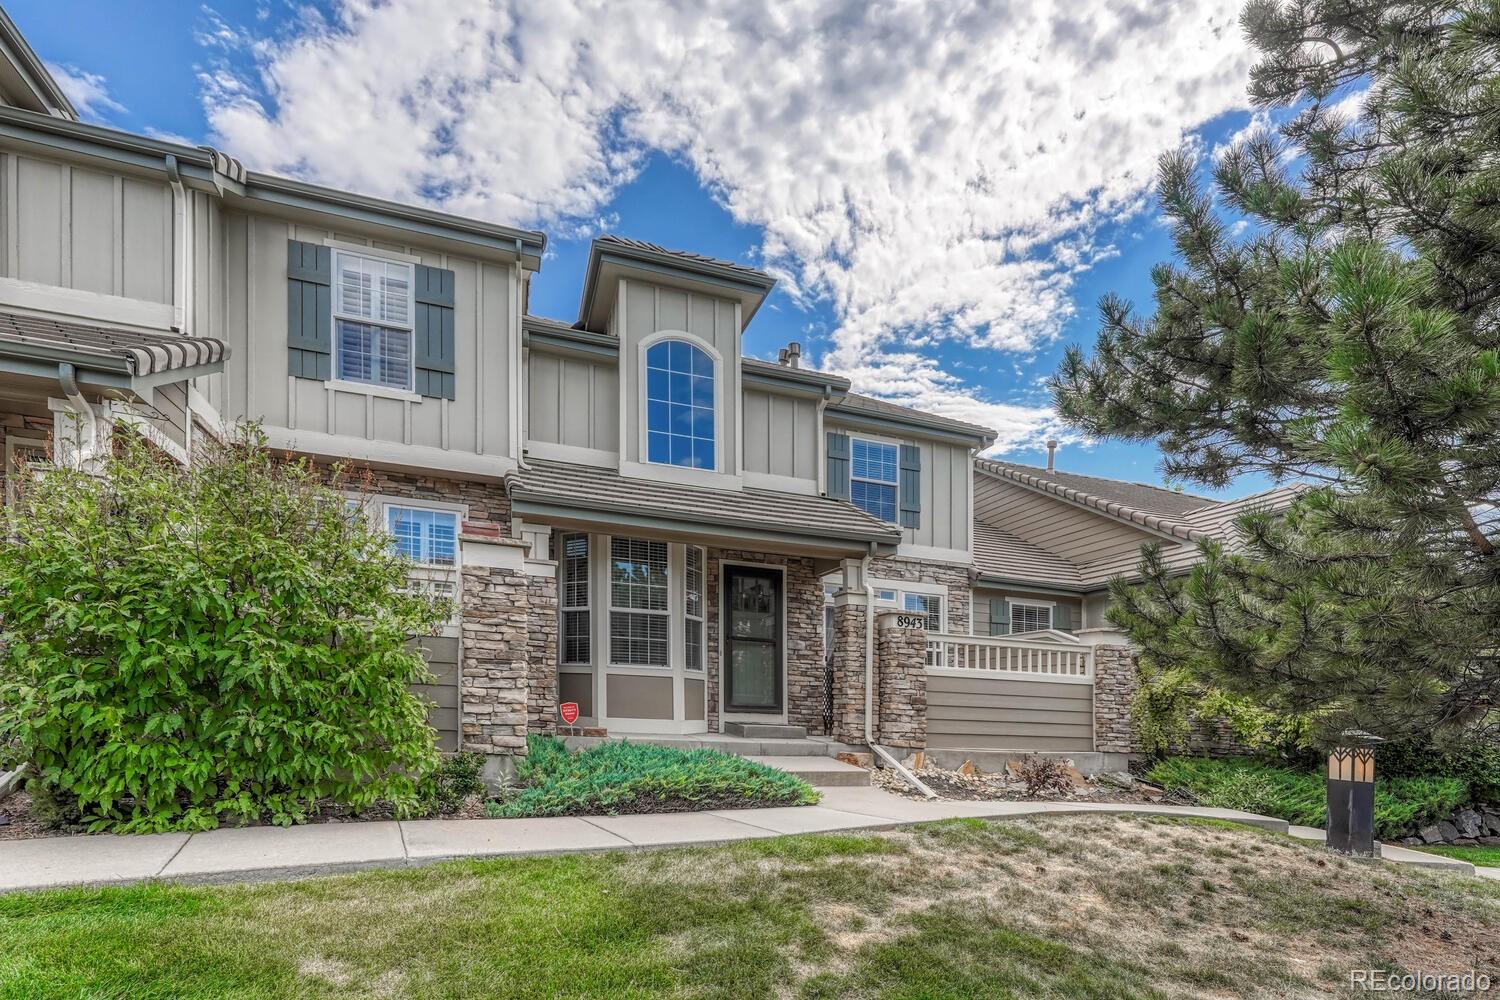 View Highlands Ranch, CO 80129 townhome